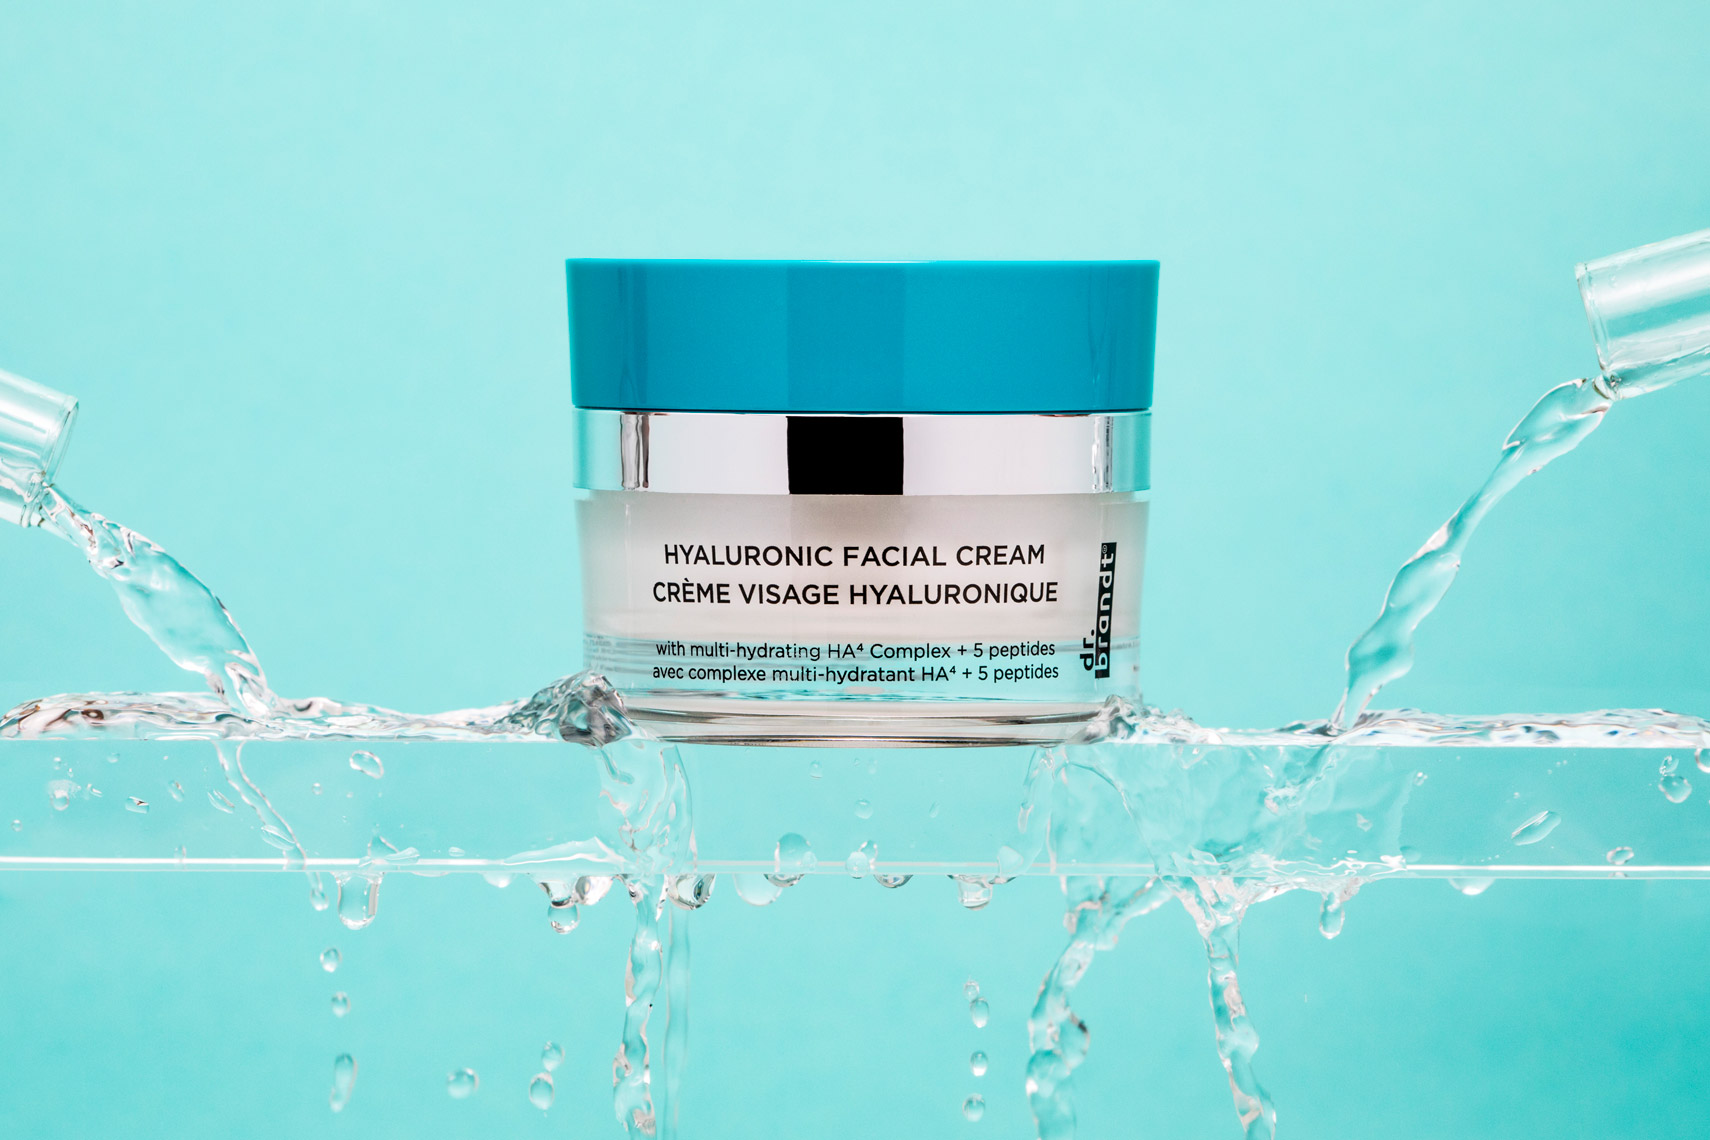 Dr. Brandt, Hyaluronic Cream, Hyaluronic Acid, Skincare, Skincare Photography, Product Photography, Makeup, Cosmetics, Makeup Photography, Cosmetic Photography, Creative Still, Jewelry, fashion jewelry, jewelry photography, product photography, product photo, studio photography, Ian Jacob, Ian Jacob Photography